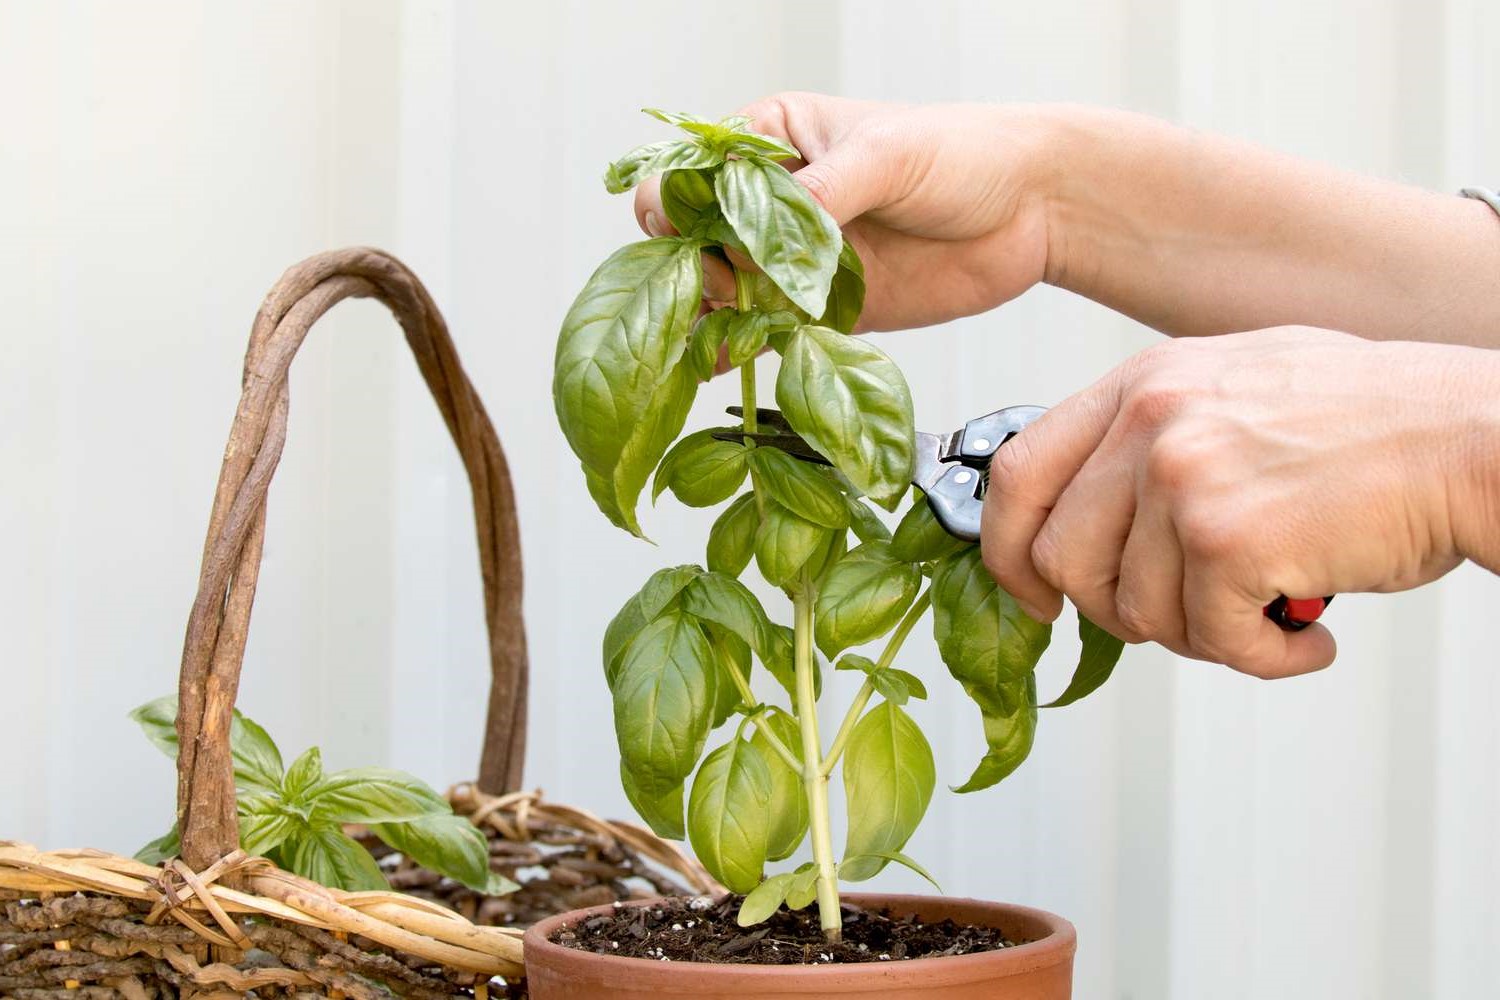 How To Harvest Basil